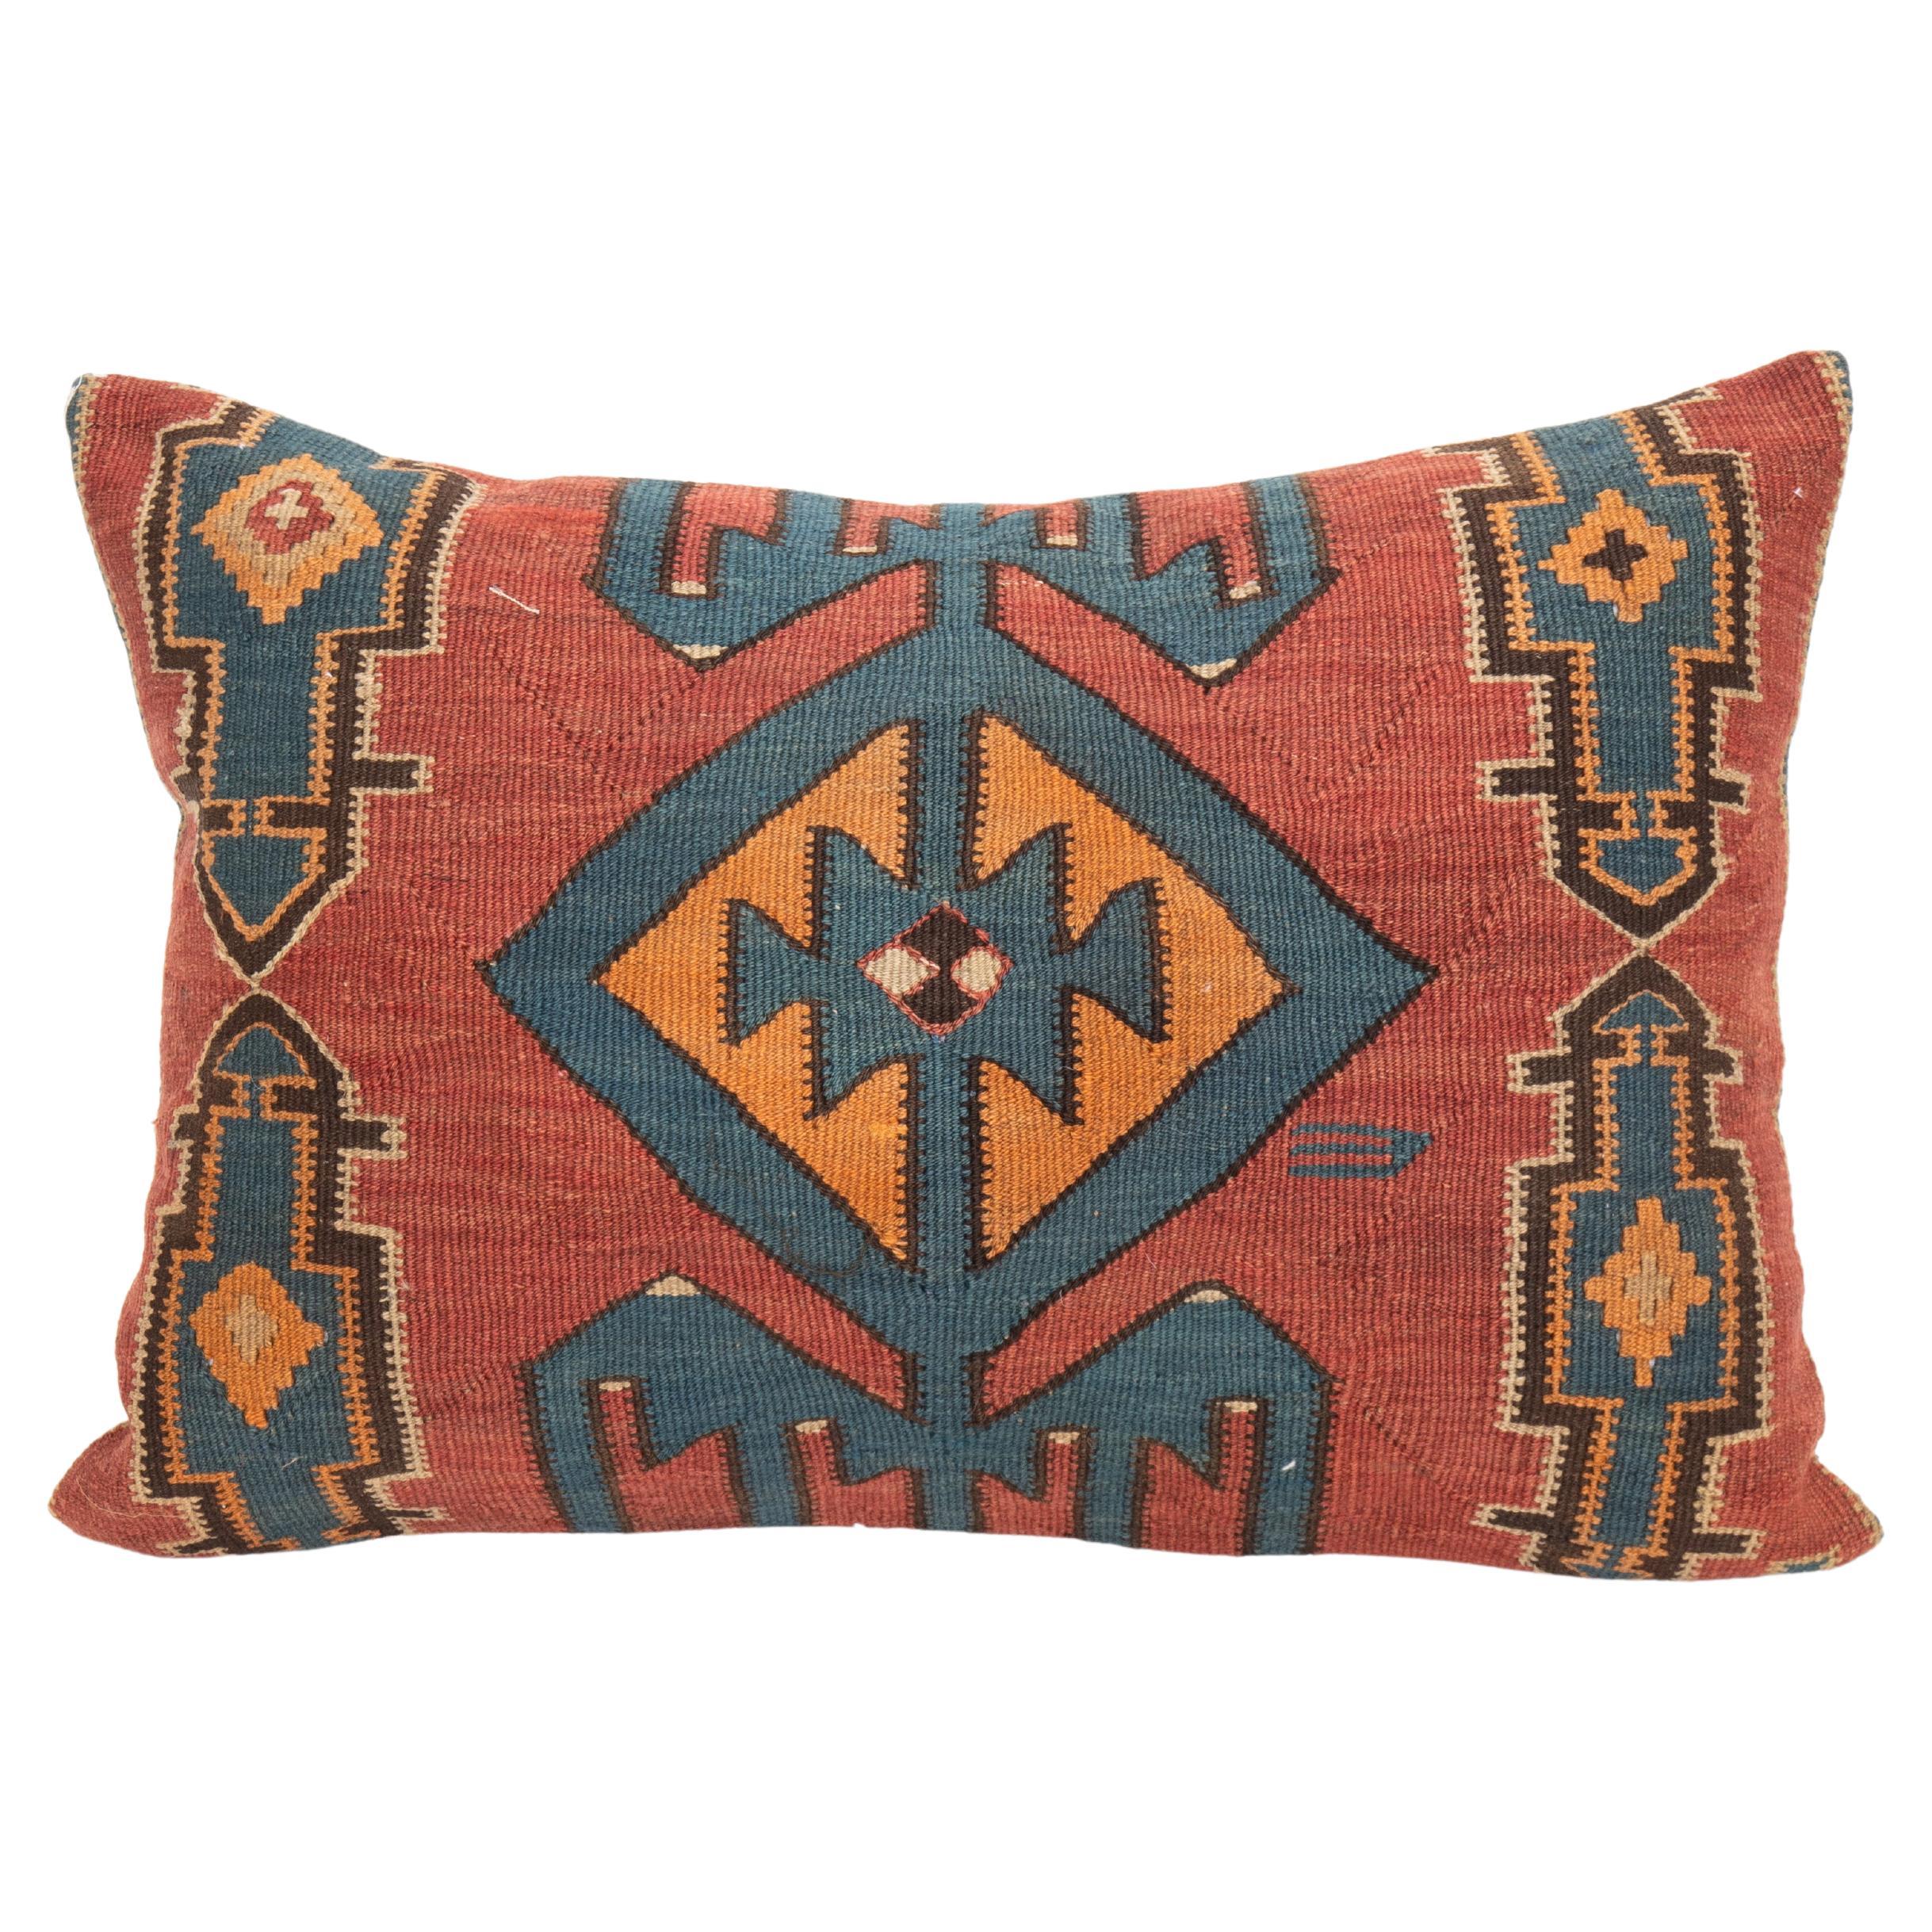  Floor Cushion Made from an Antique Avar Kilim from Dagestan , Early 20th C. For Sale